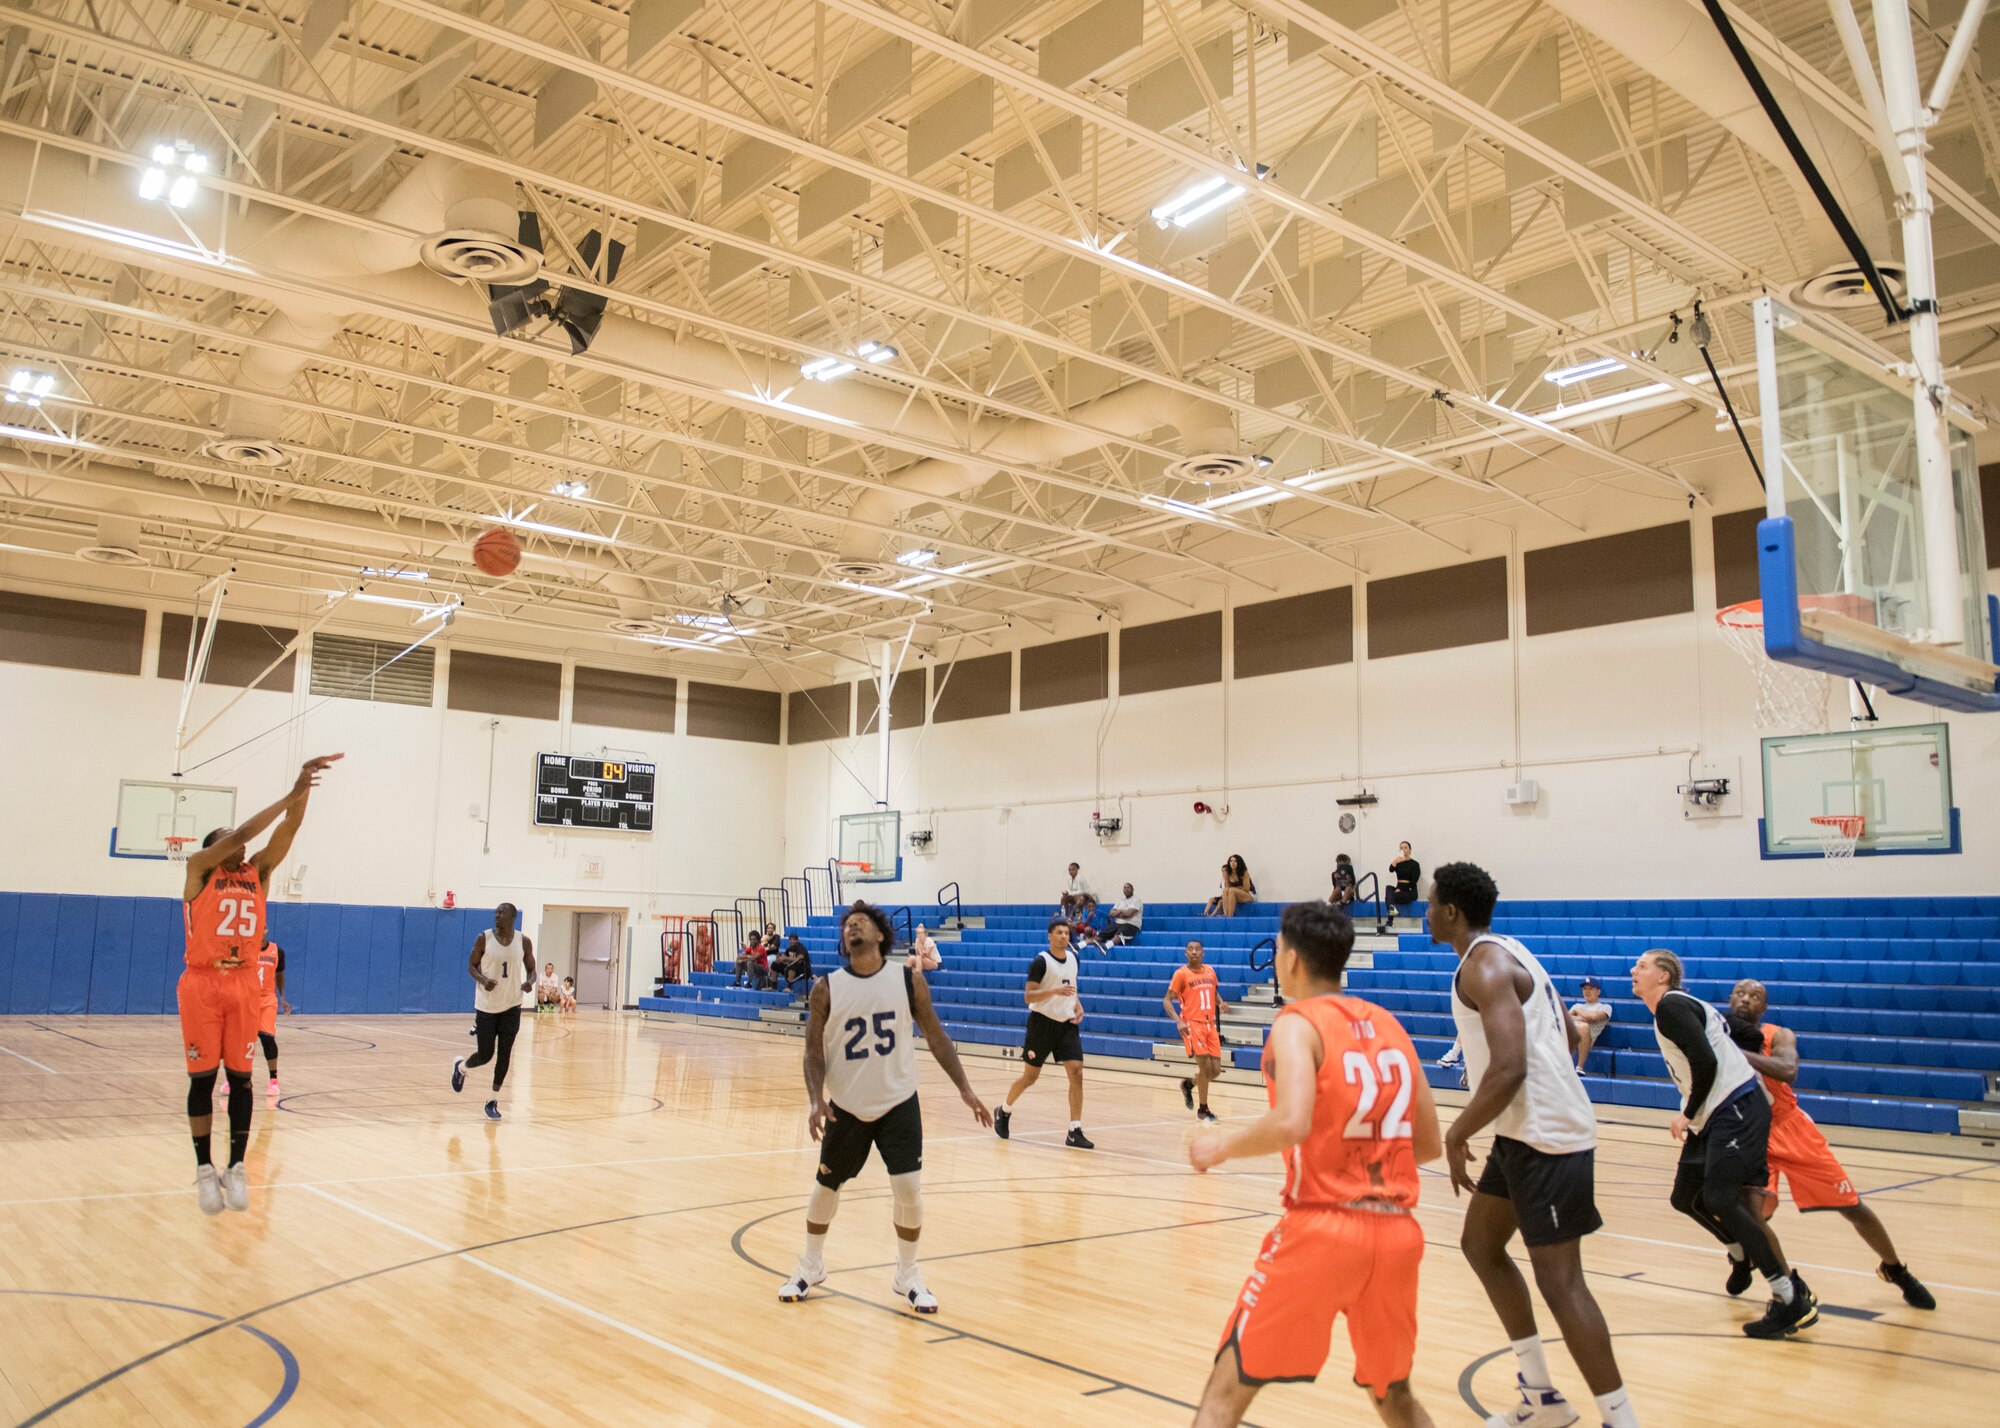 Basketball players for the Mountain Home Air Force Base Gunfighters play against a local team, Aug. 25, 2019, at Mountain Home Air Force Base, Idaho. The Gunfighters faced off with a team made of college players and players who've participated in the National Basketball Association's development league. (U.S. Air Force photo by Senior Airman Tyrell Hall)